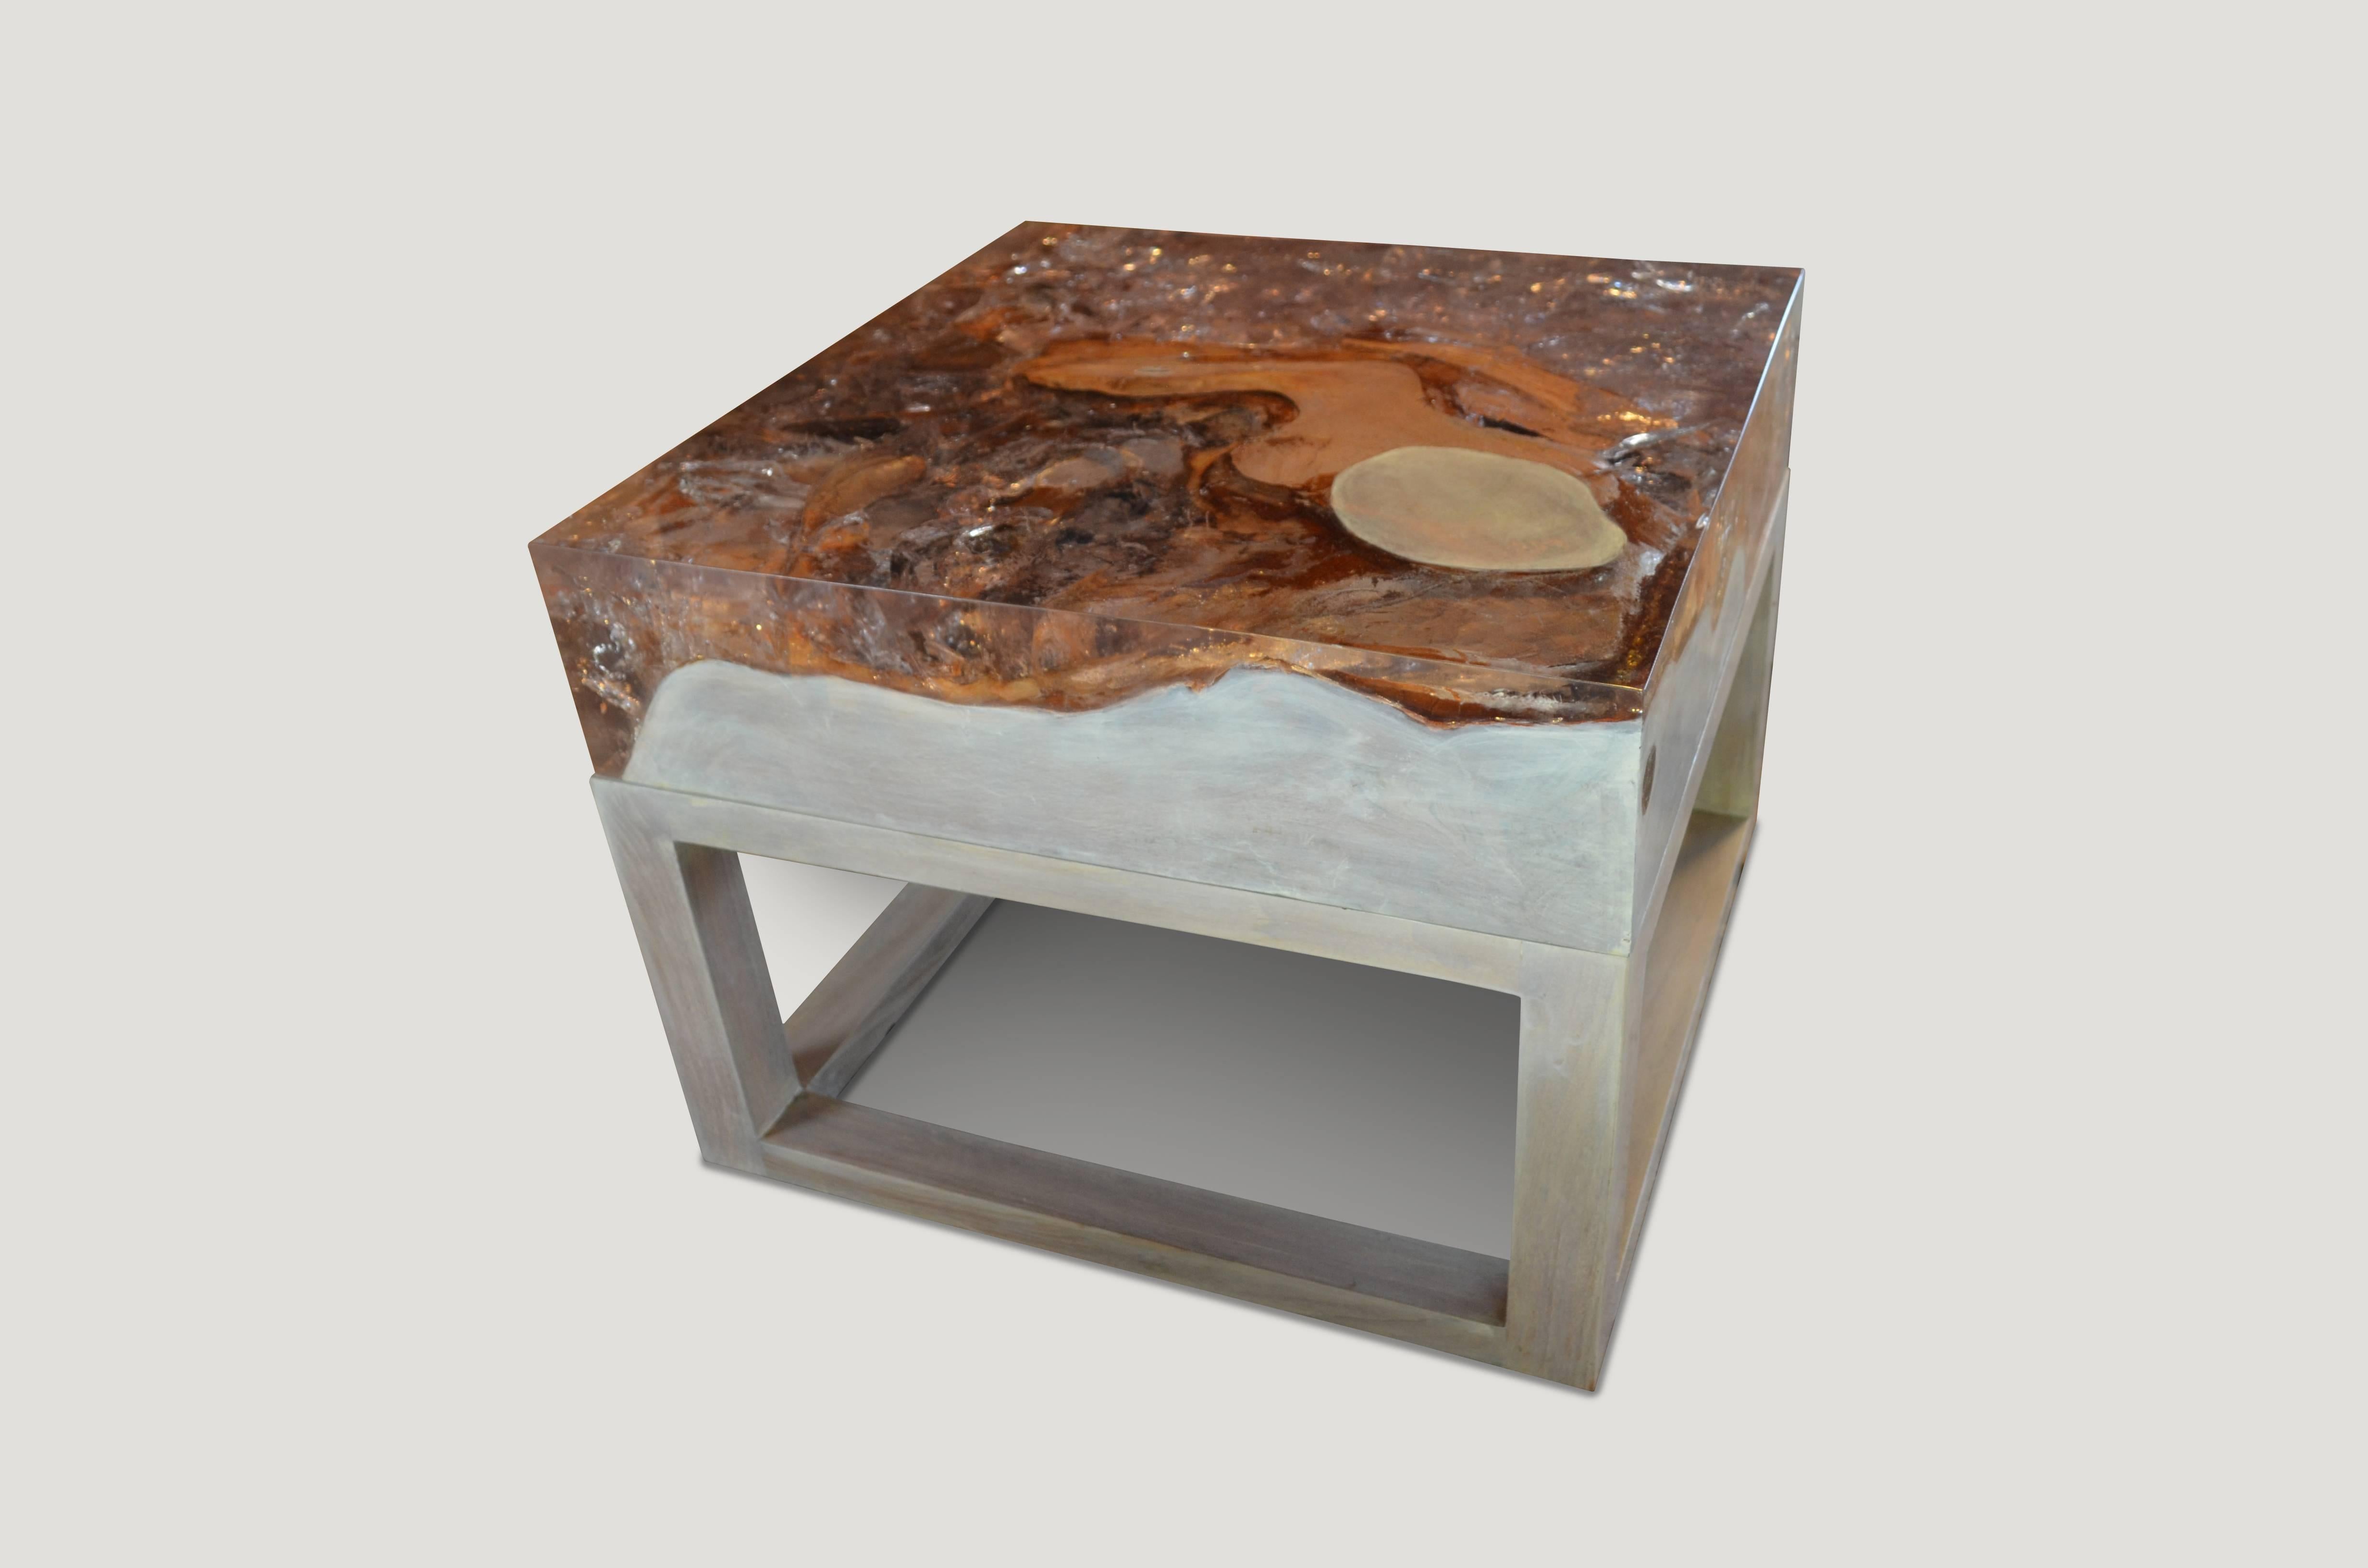 This Cracked Resin side table or coffee table is made from reclaimed teak infused with clear resin, which resembles a unique quartz crystal with many different facets, as shown here with gold, warm tones created naturally from the wood. Straight